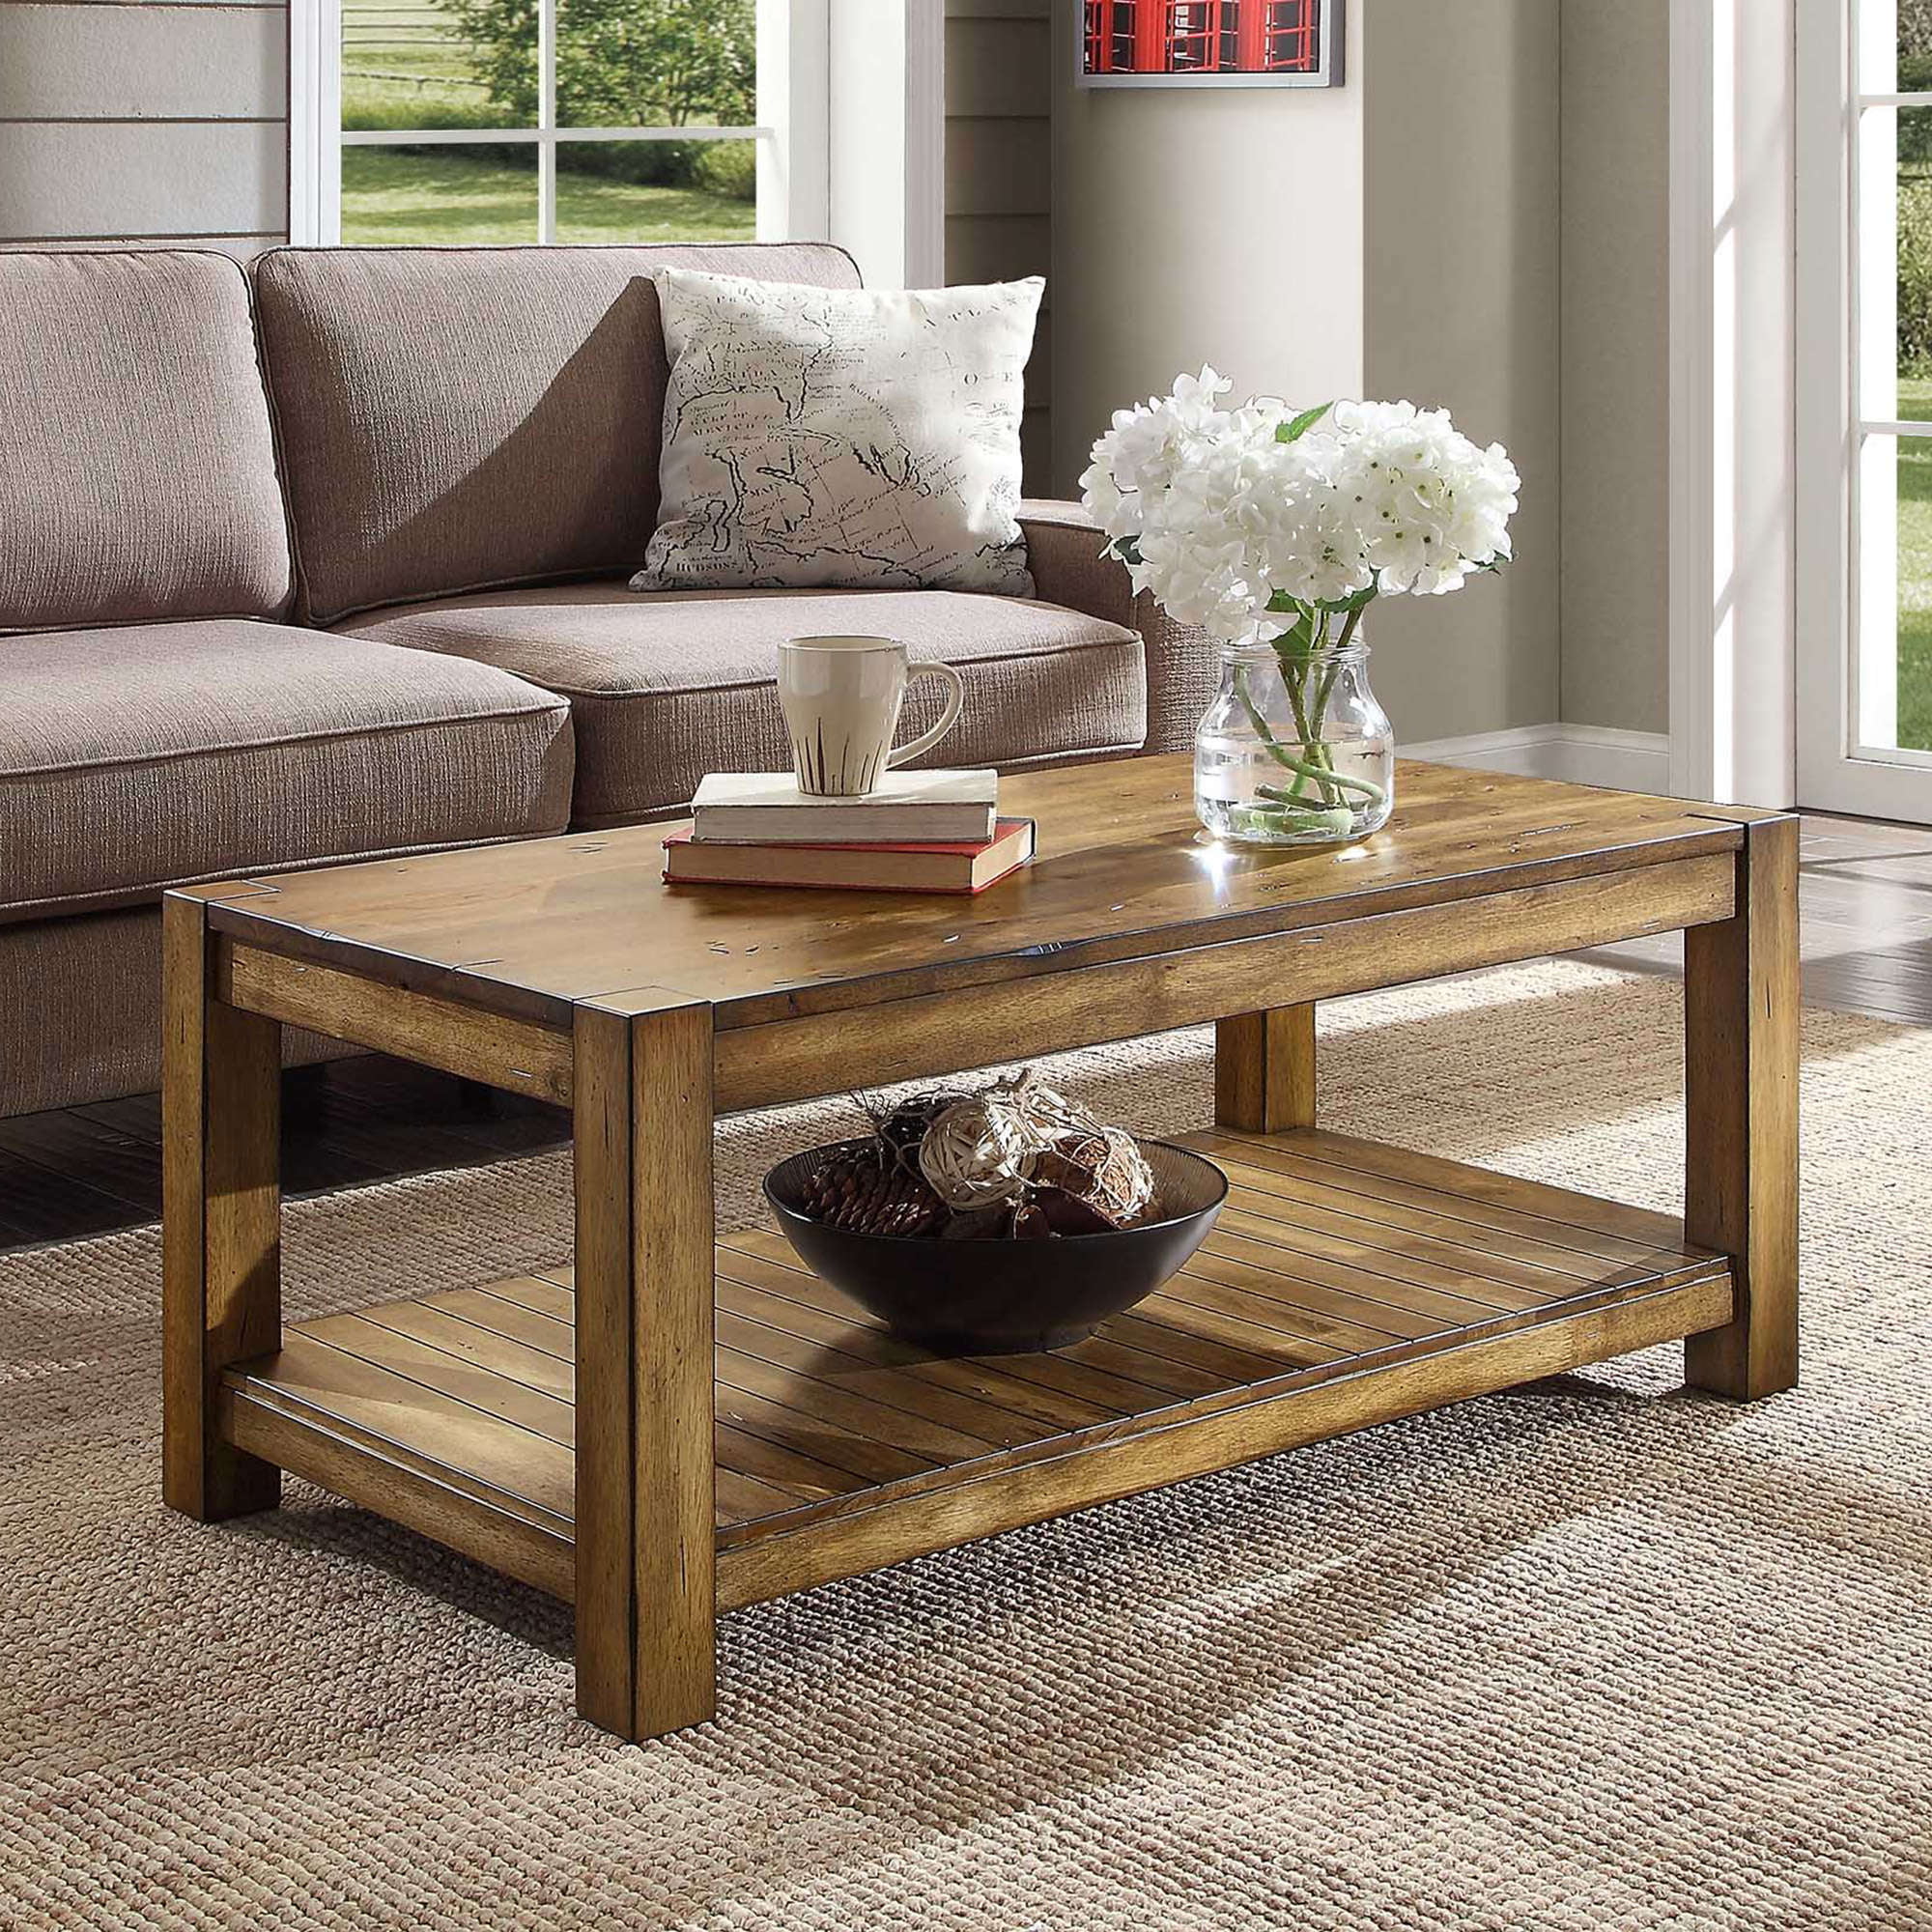 Better Homes & Gardens Bryant Solid Wood Coffee Table, Rustic Maple Brown Finish